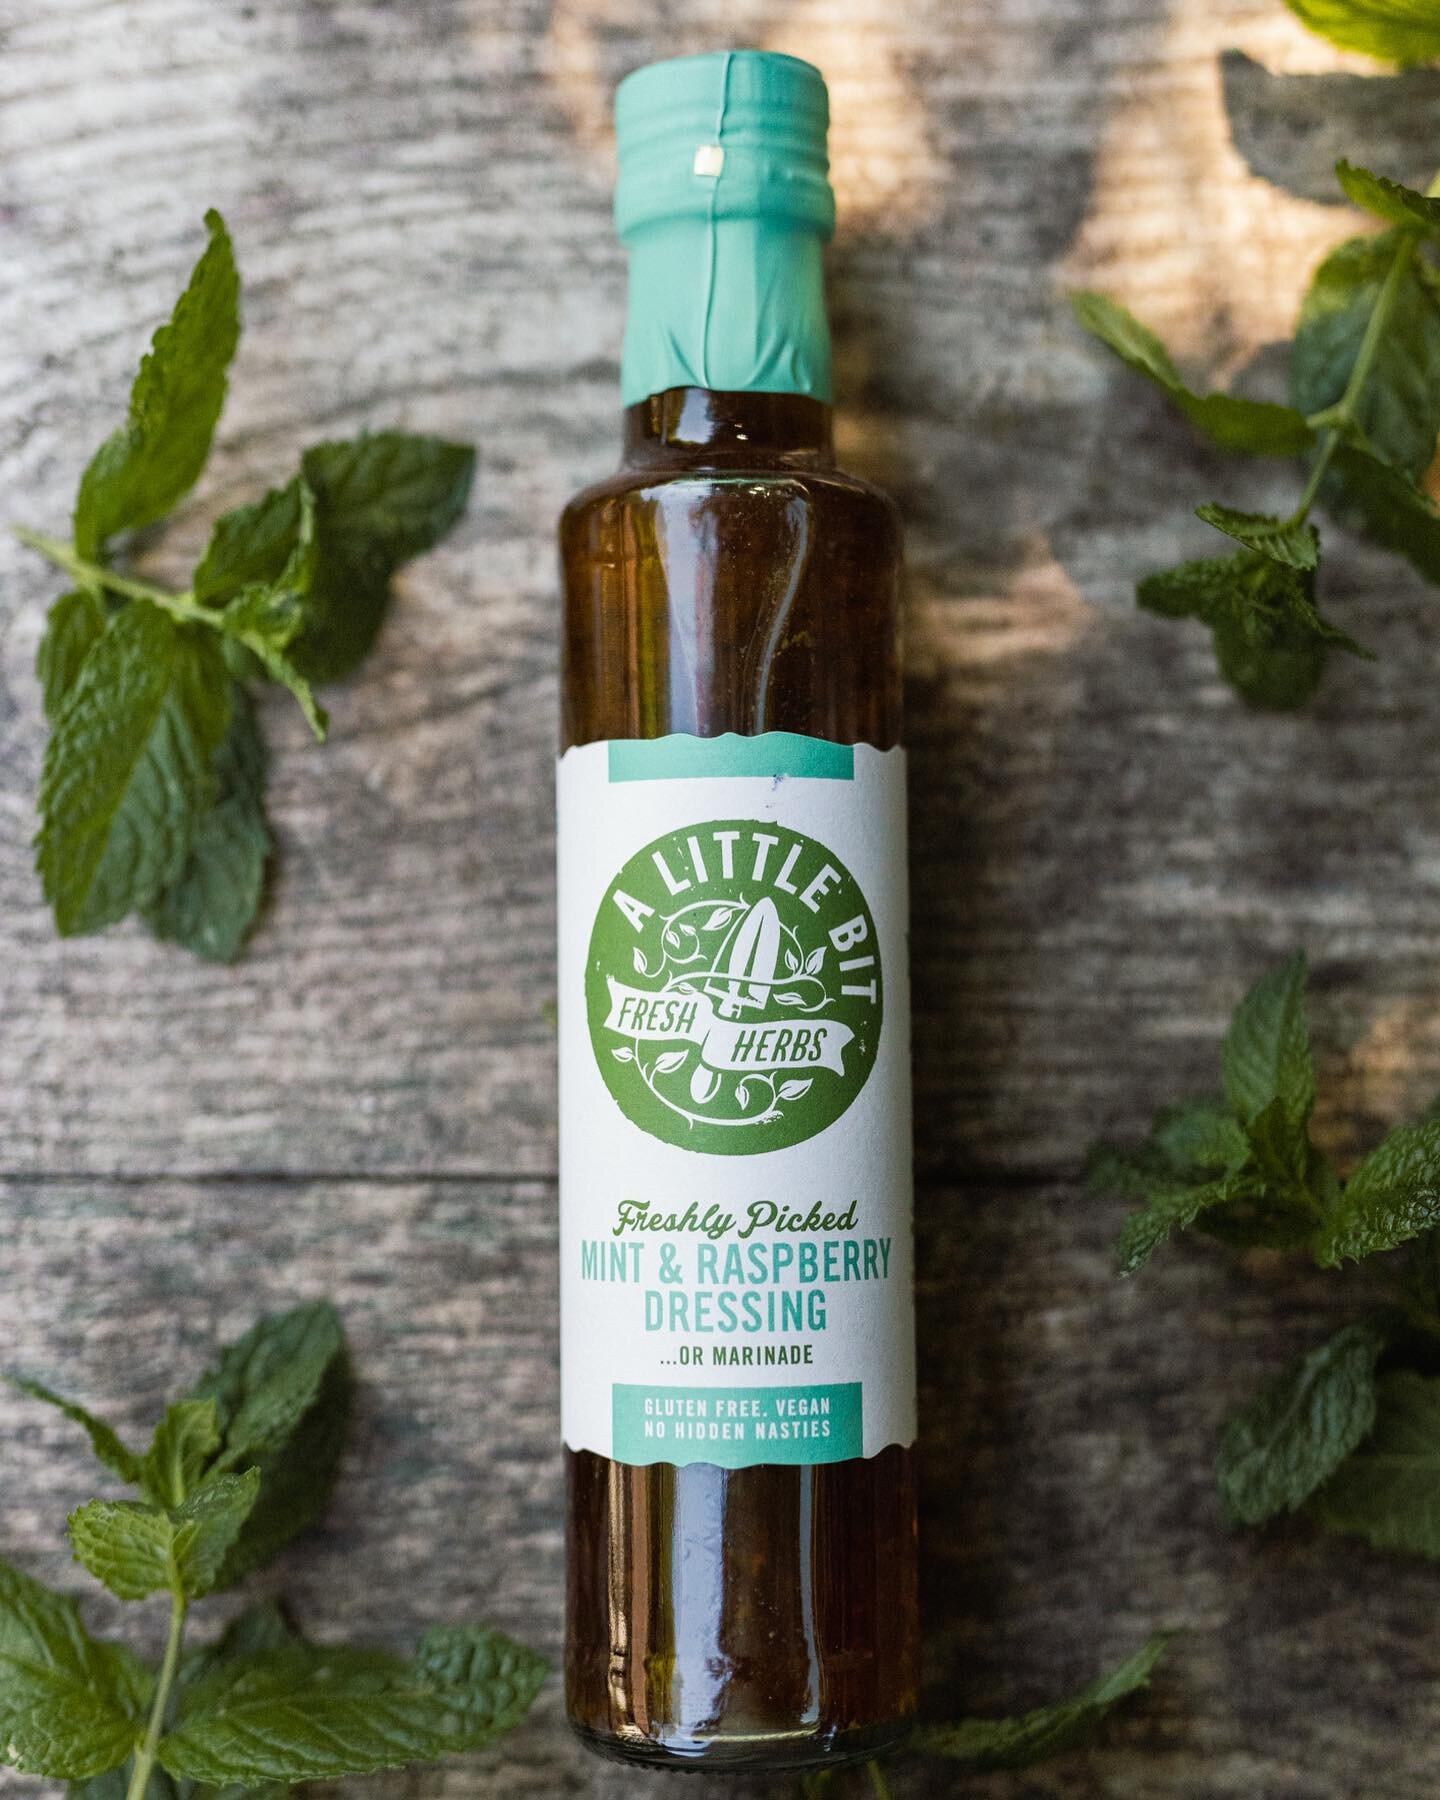 Make the most of the summertime with 'a little bit' of this fresh, sweet Mint &amp; Raspberry dressing. Delicate flavours of raspberry, with a hit of mint are sure to compliment your salad, dress your chicken or coat your fish or prawns. It's also gr